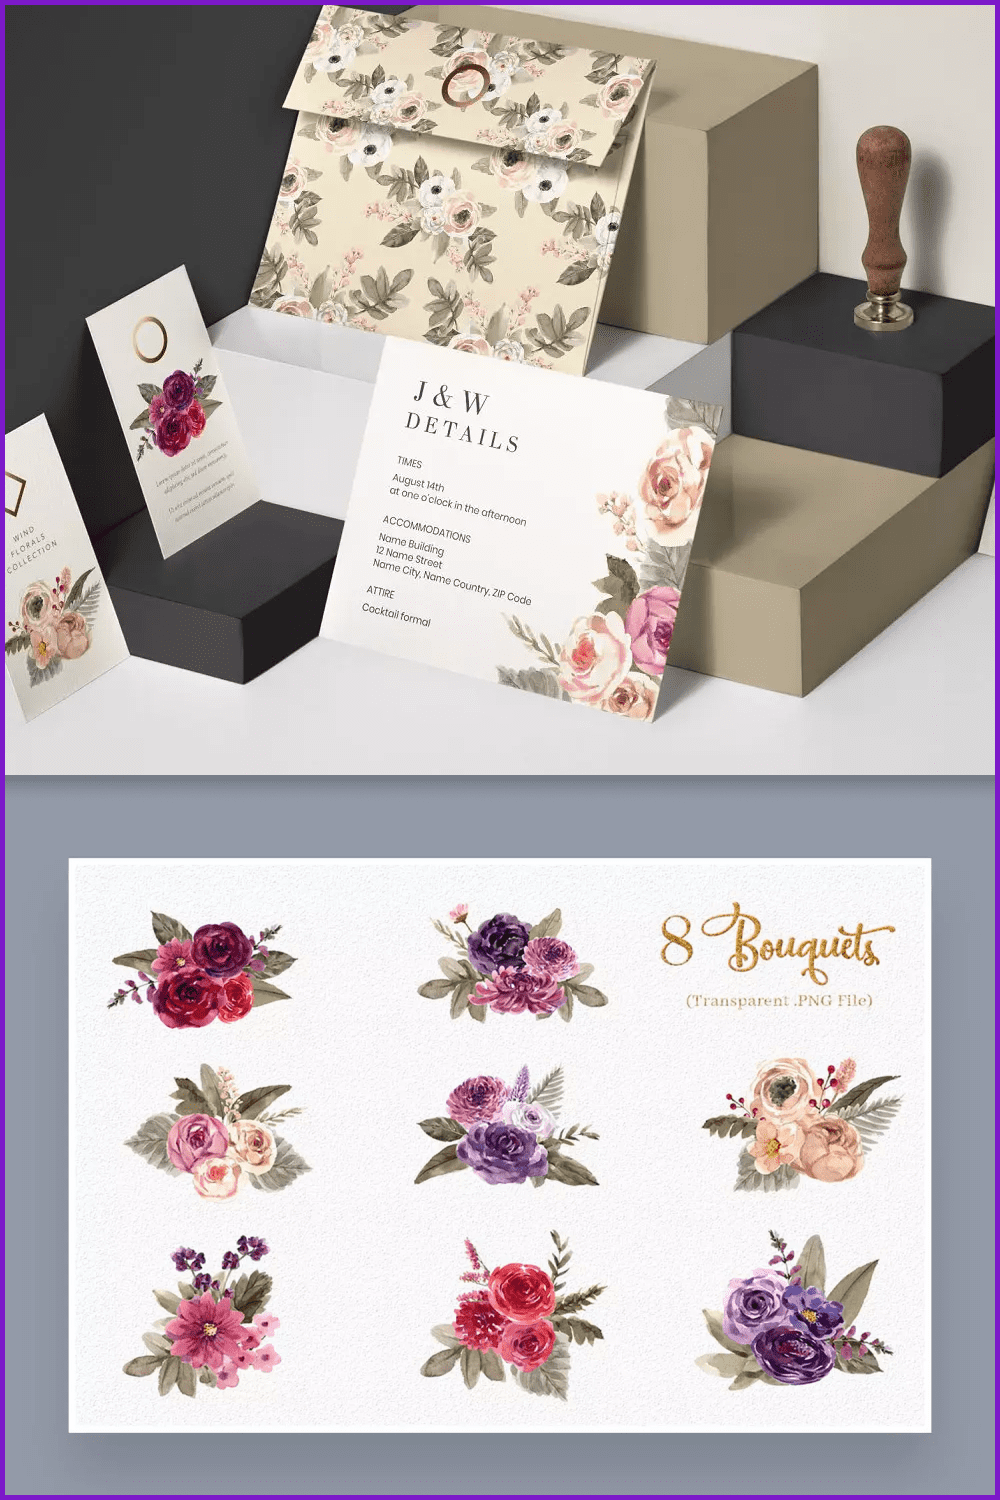 Collage of images of bouquets of flowers on postcards and business cards.